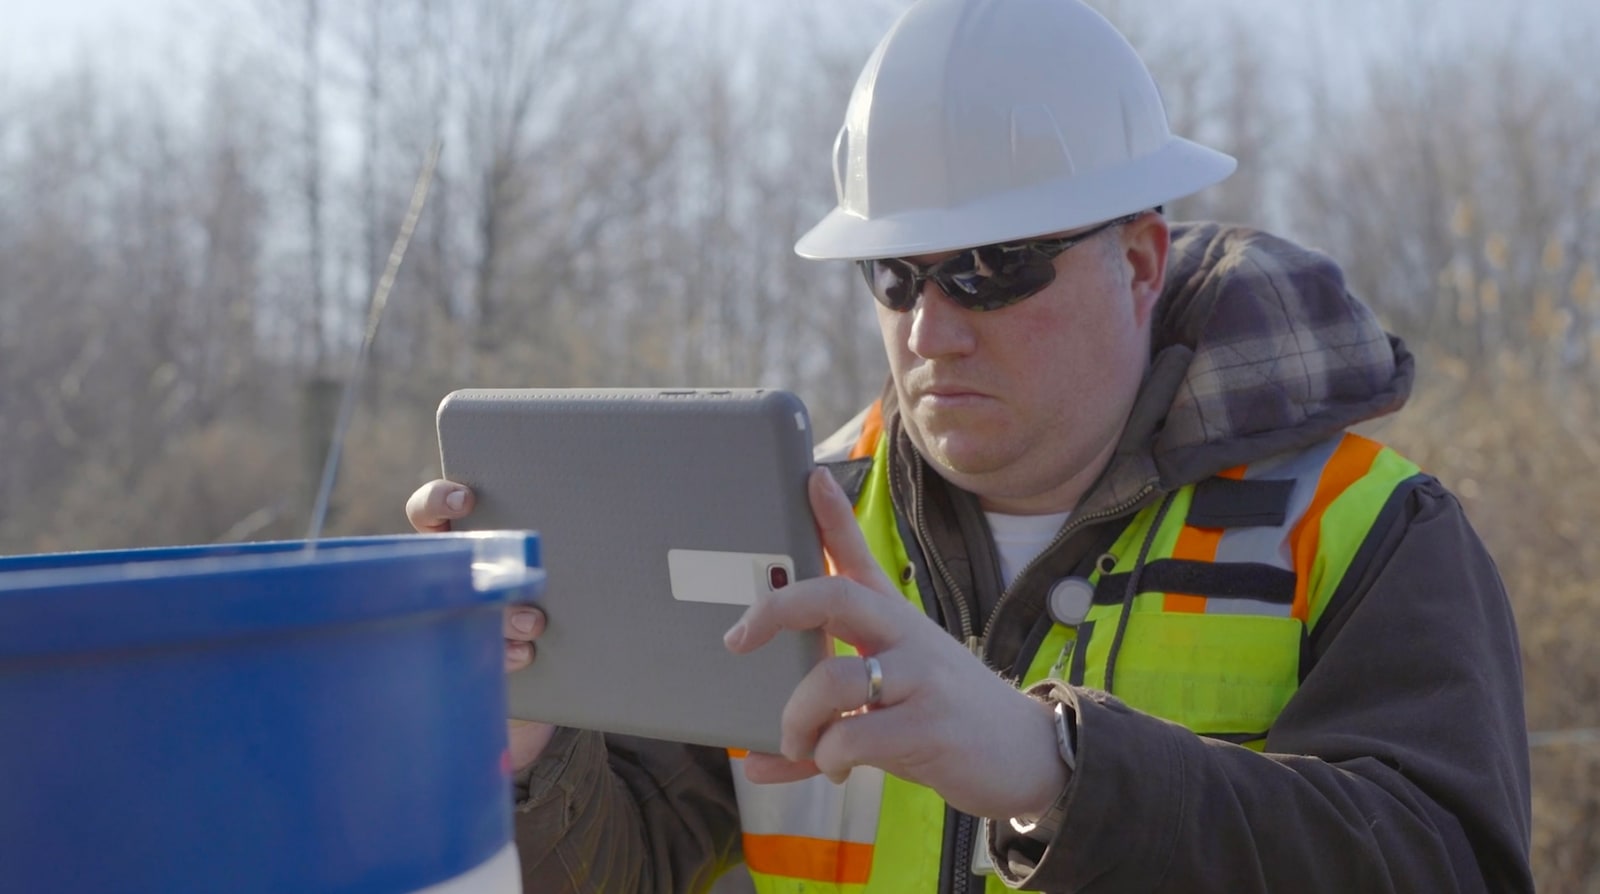 man wearing a hard hat and high visibility vest taking a photo using a tablet of a chemical barrel